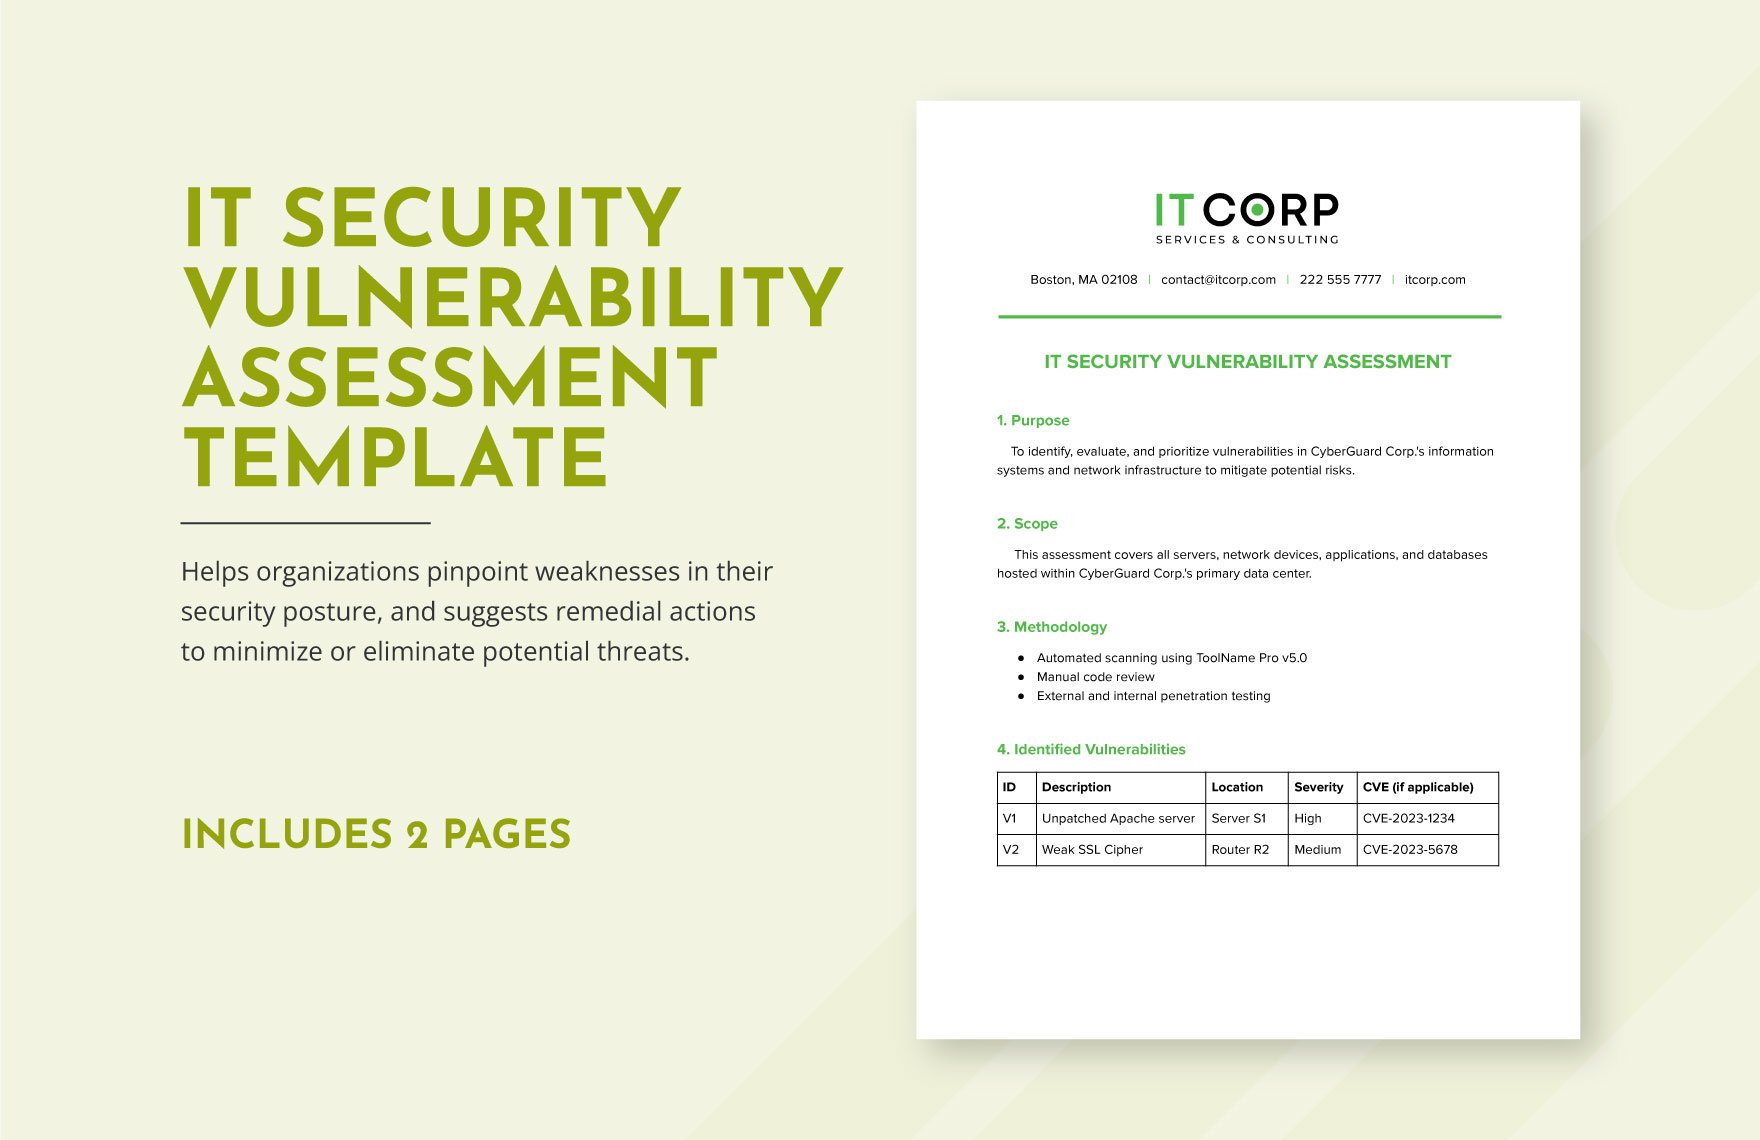 IT Security Vulnerability Assessment Template in Word, Google Docs, PDF